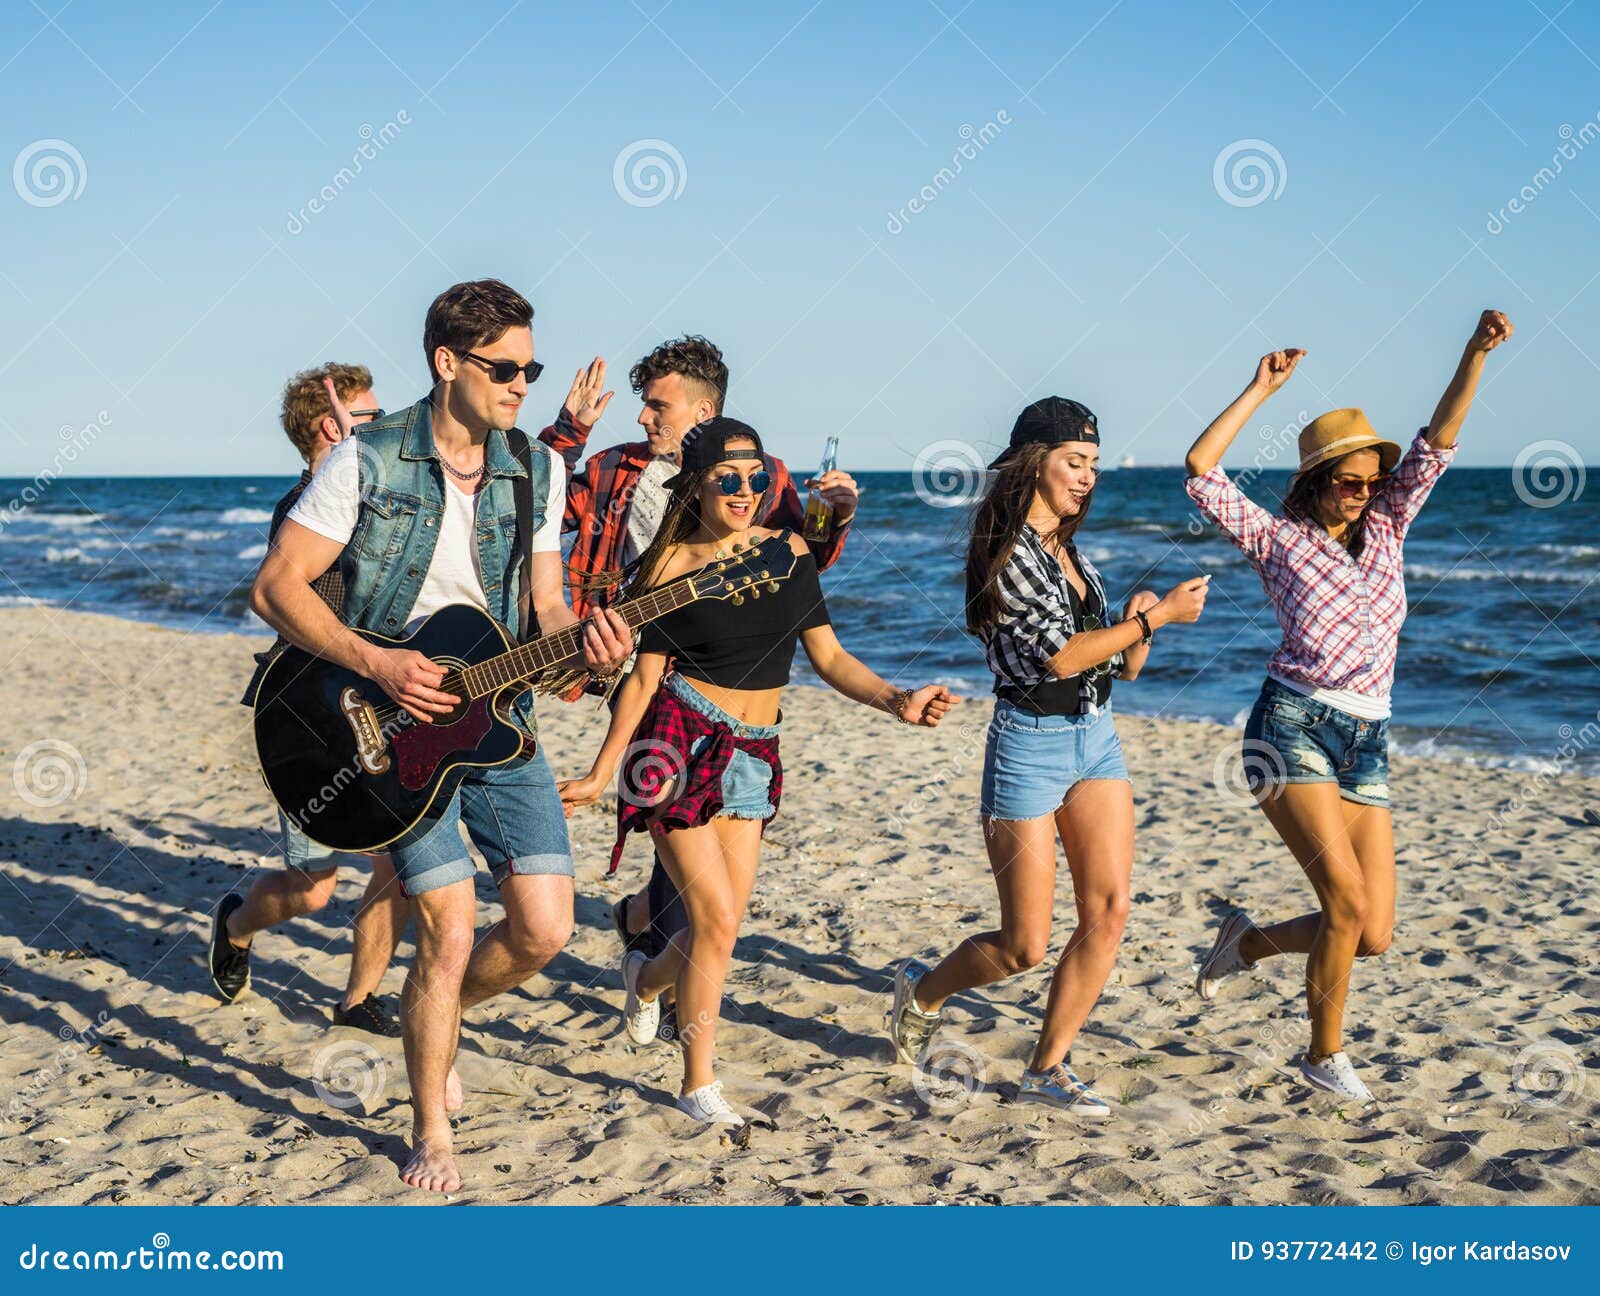 Man Playing Guitar on the Beach and His Friends Dancing Around Him ...